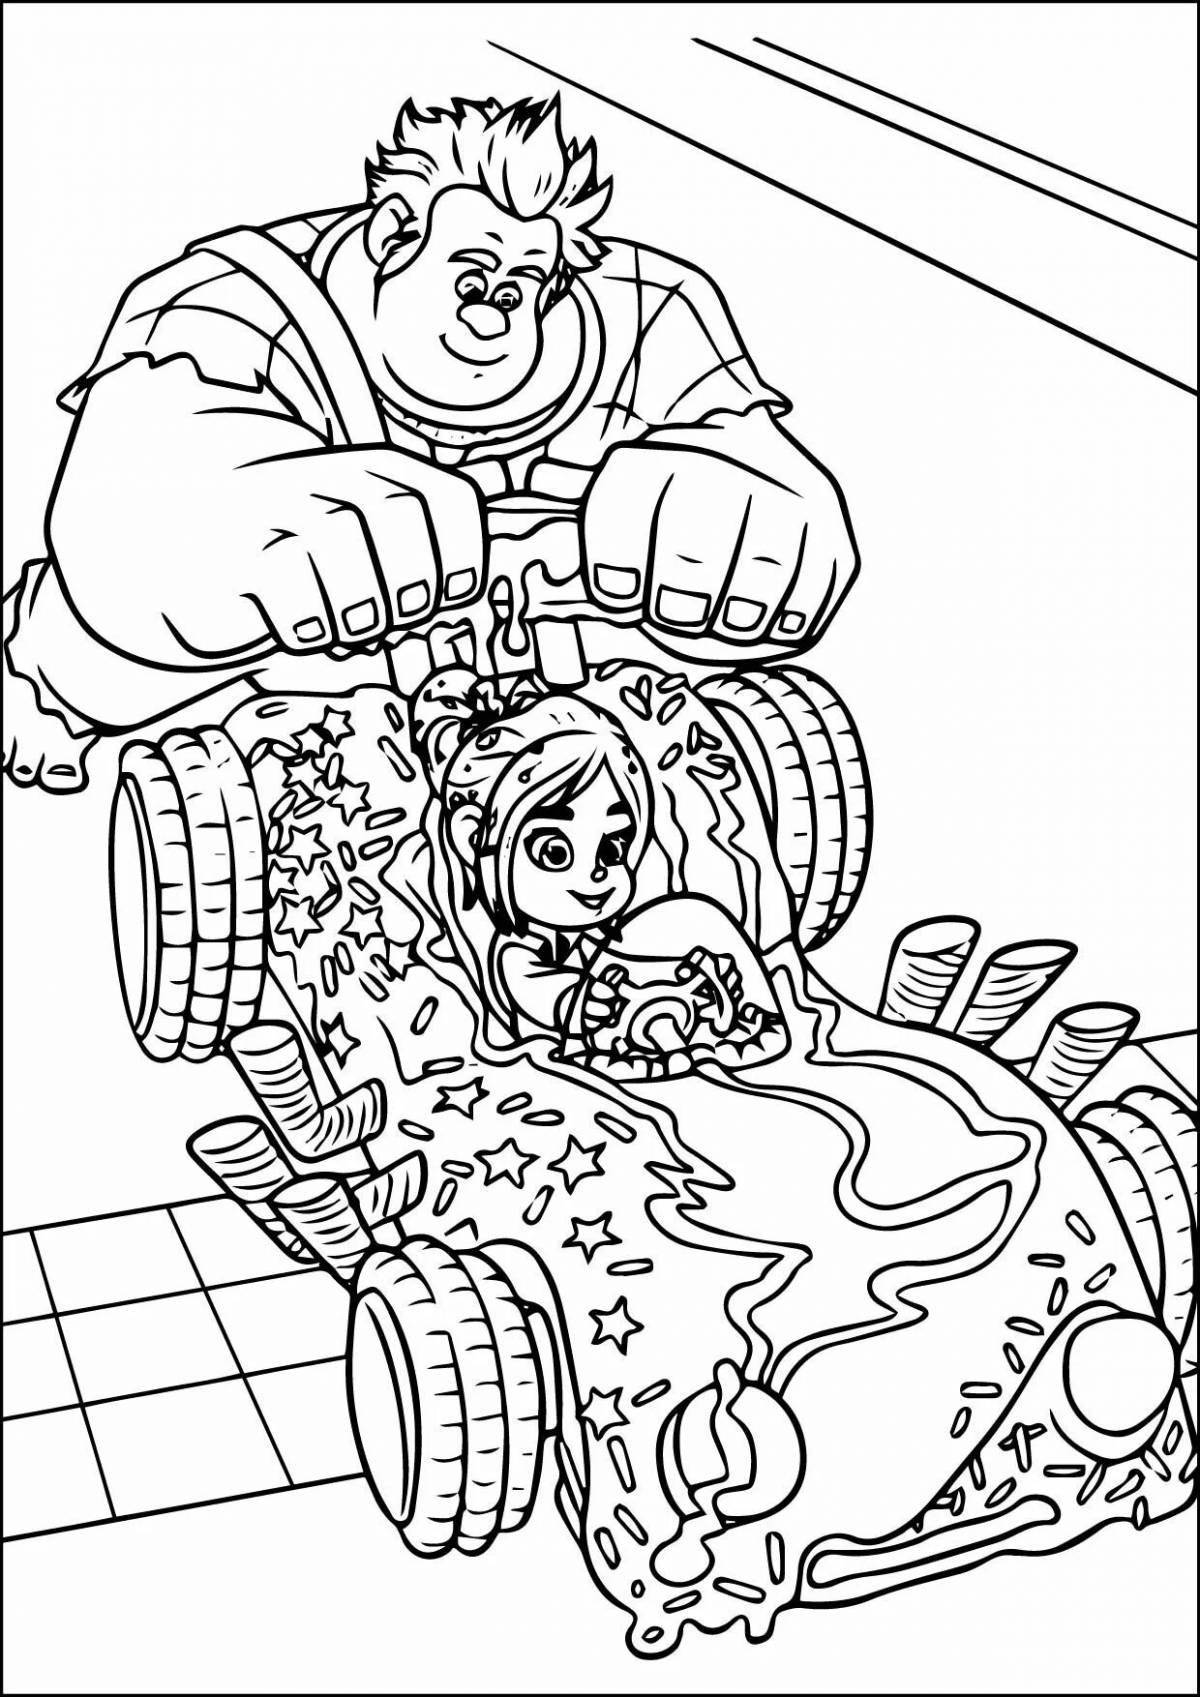 Fabulous Vanellope and Ralph coloring book